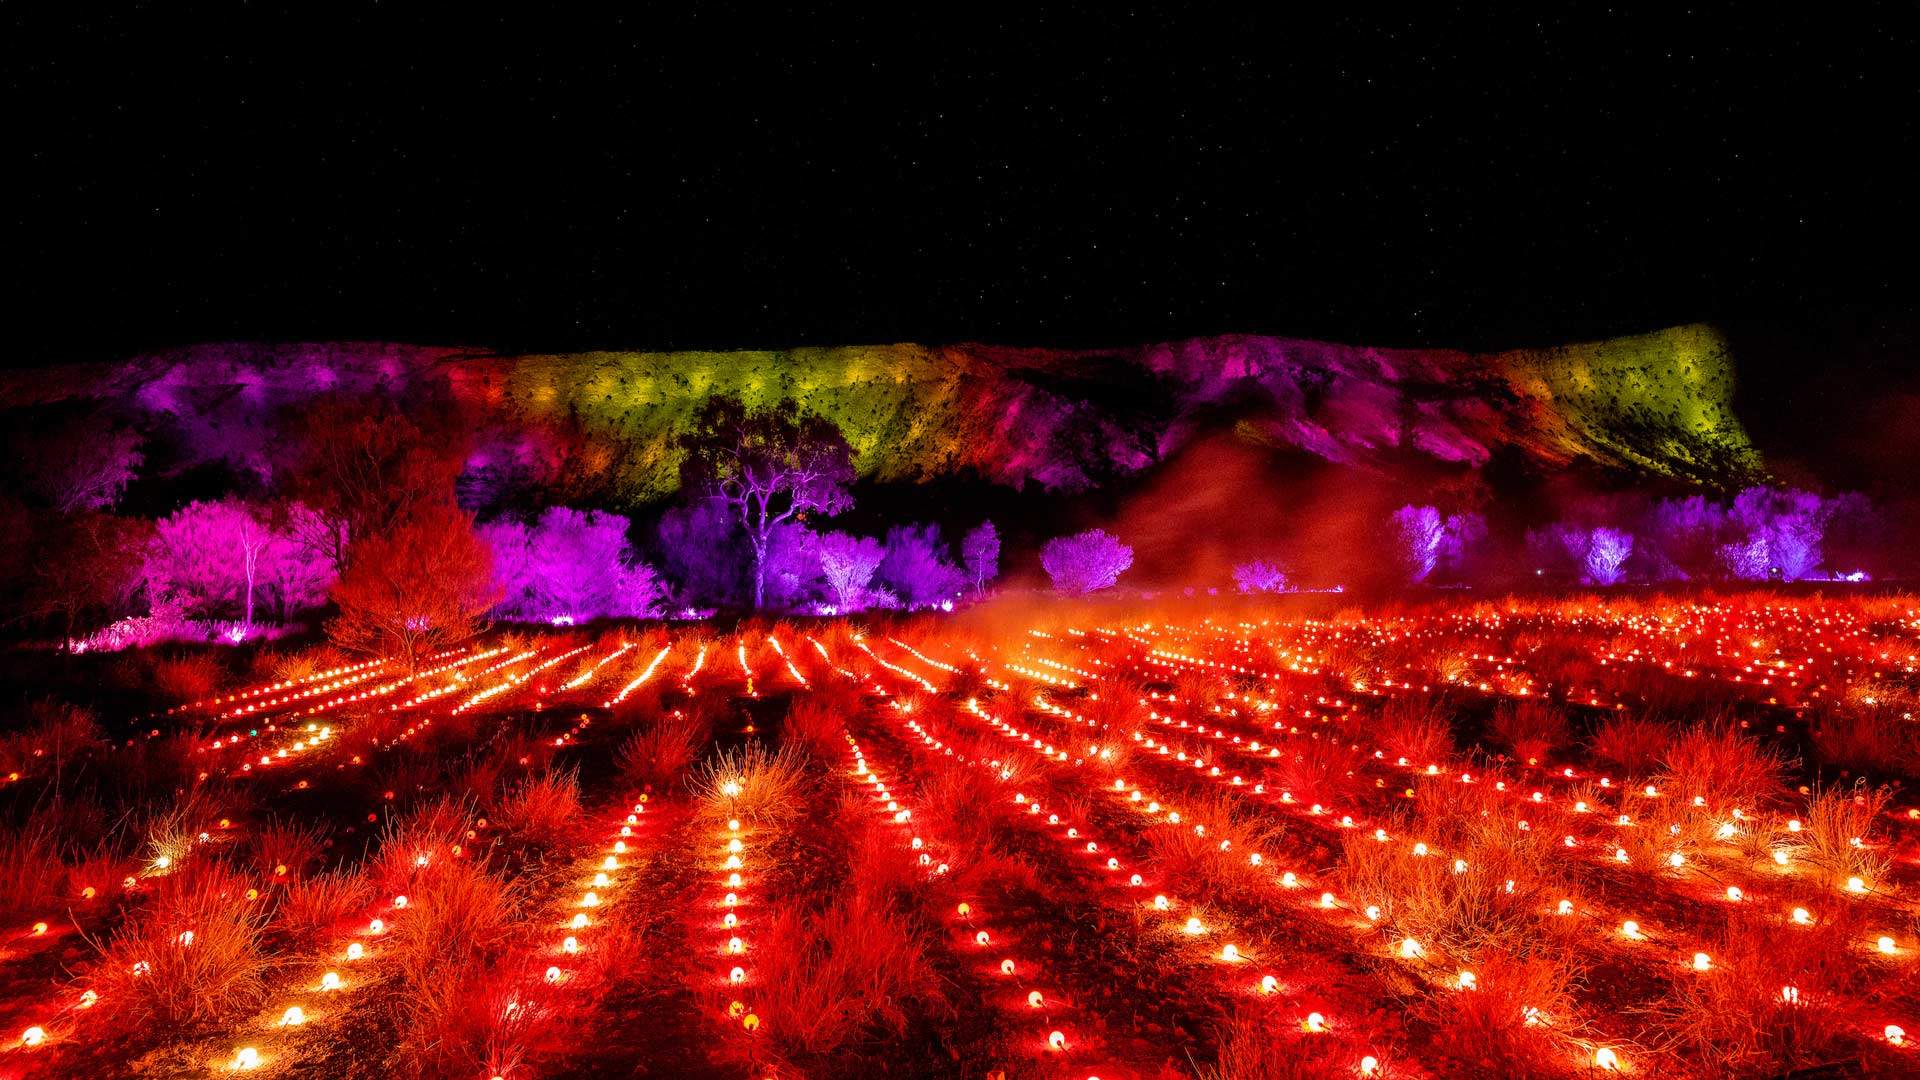 Parrtjima Festival Is Returning to Light Up Alice Springs in 2019 with Six Epic Light Installations